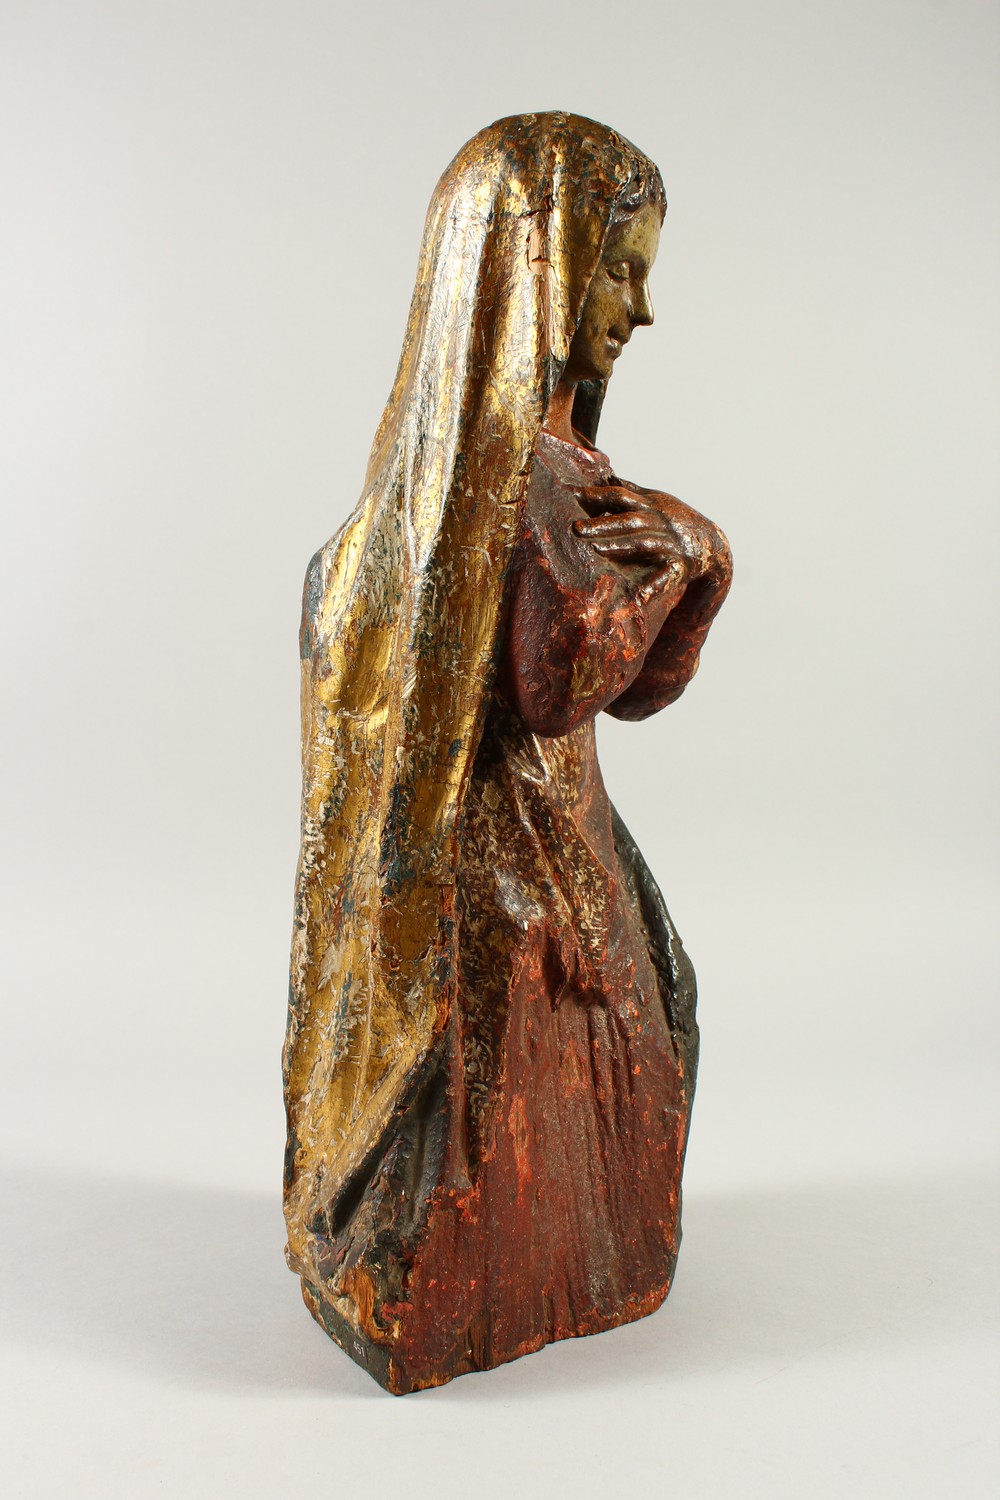 A 17TH - 18TH CENTURY ITALIAN CARVED, GILDED AND PAINTED MADONNA. 46cm high. - Image 3 of 6